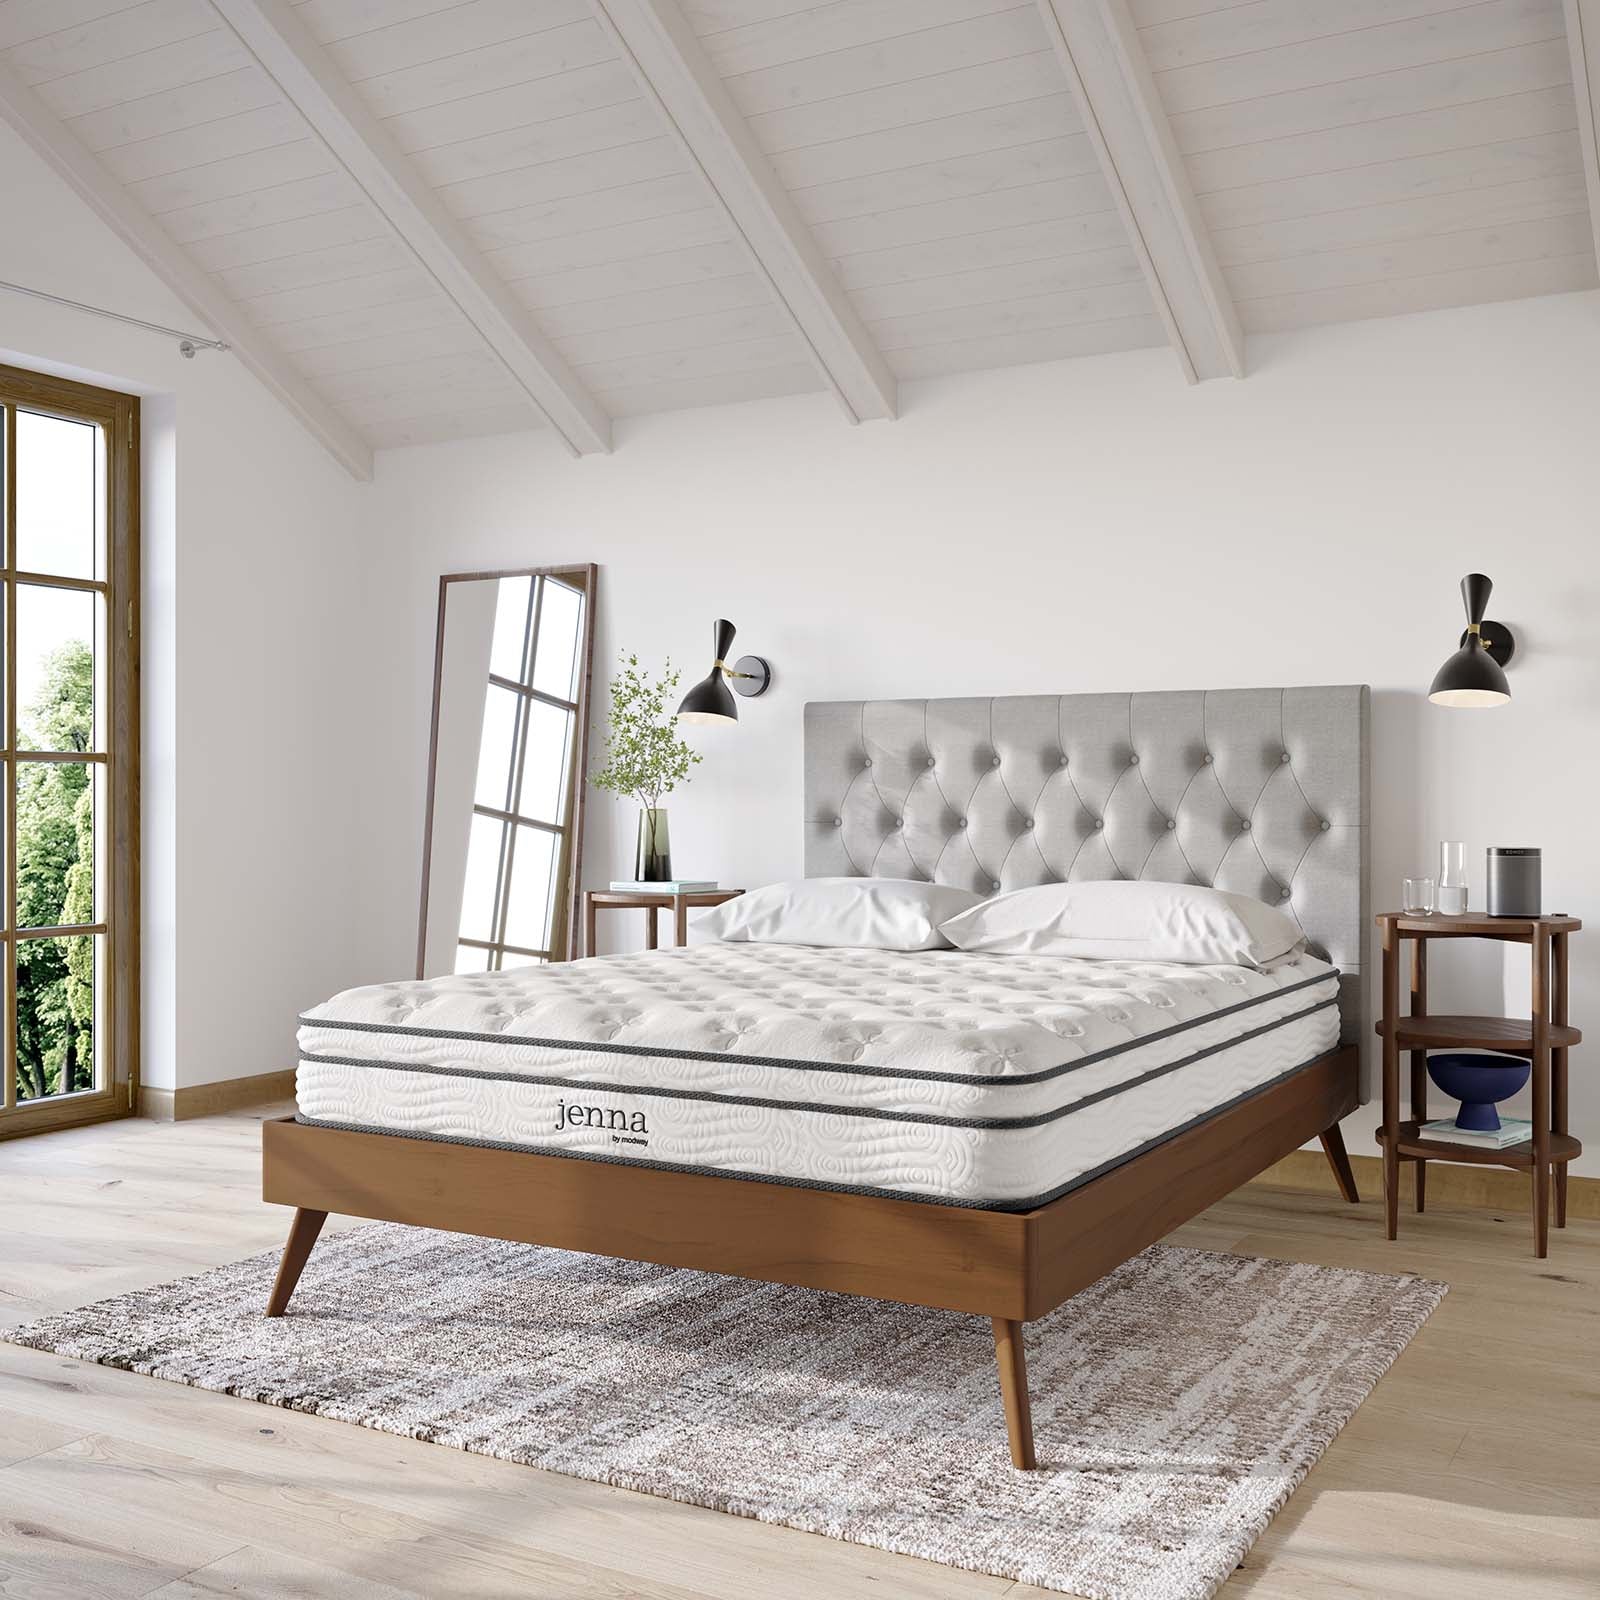 Discover the Most Popular Mattress Types for a Blissful Sleep